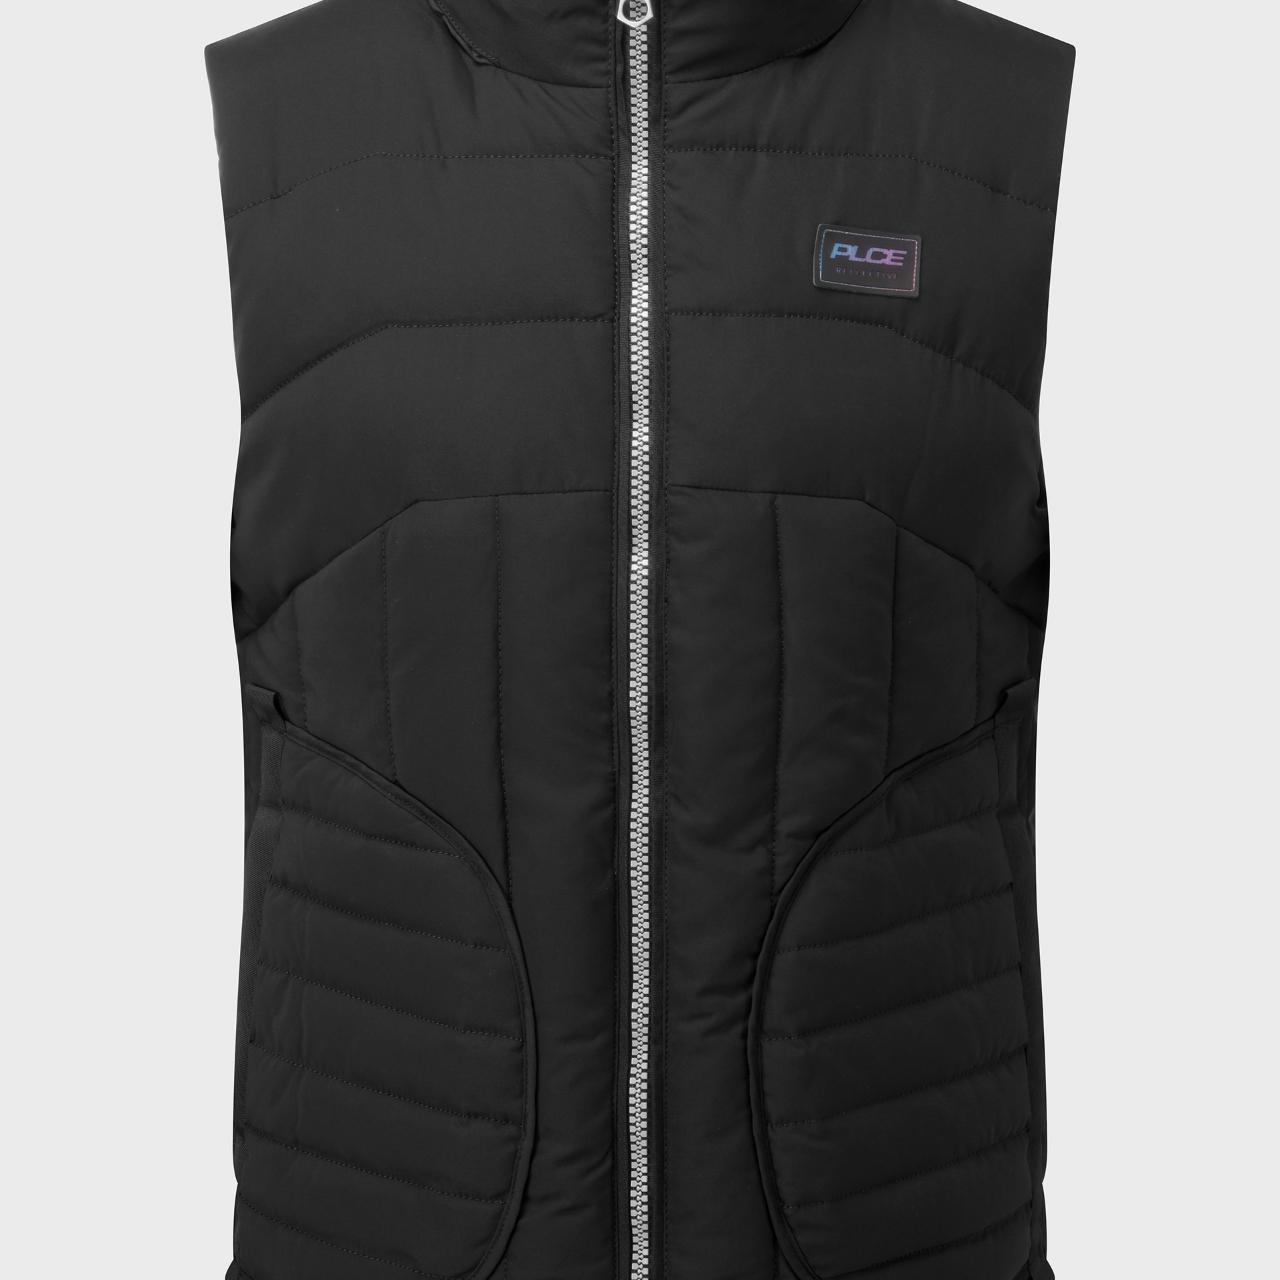 Product Image 1 - 883 POLICE 

AVANT GILET BLACK

The